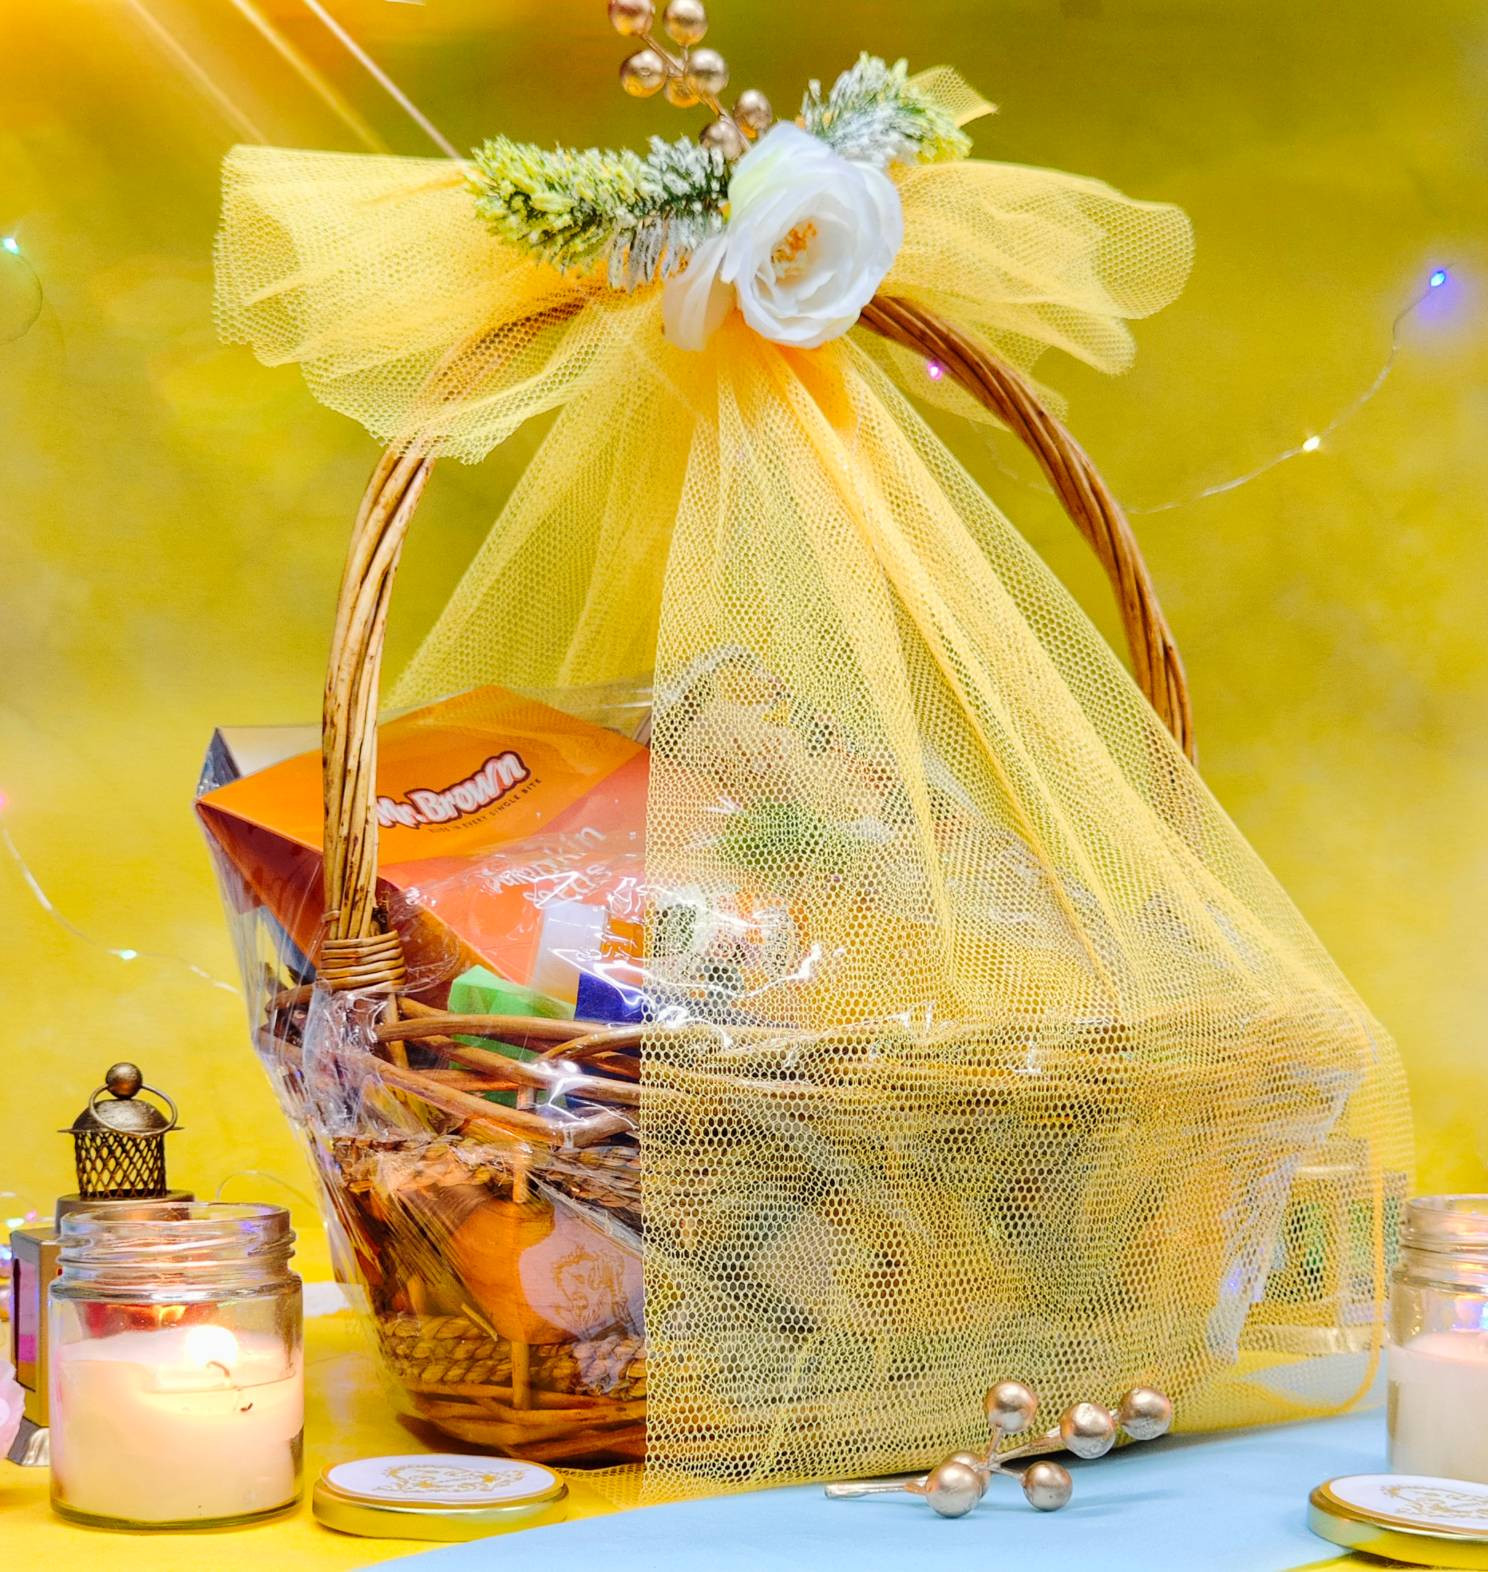 Send amazing cookies chocolates crackers cheese spread n assortments diwali  gift basket to Pune, Free Delivery - PuneOnlineFlorists